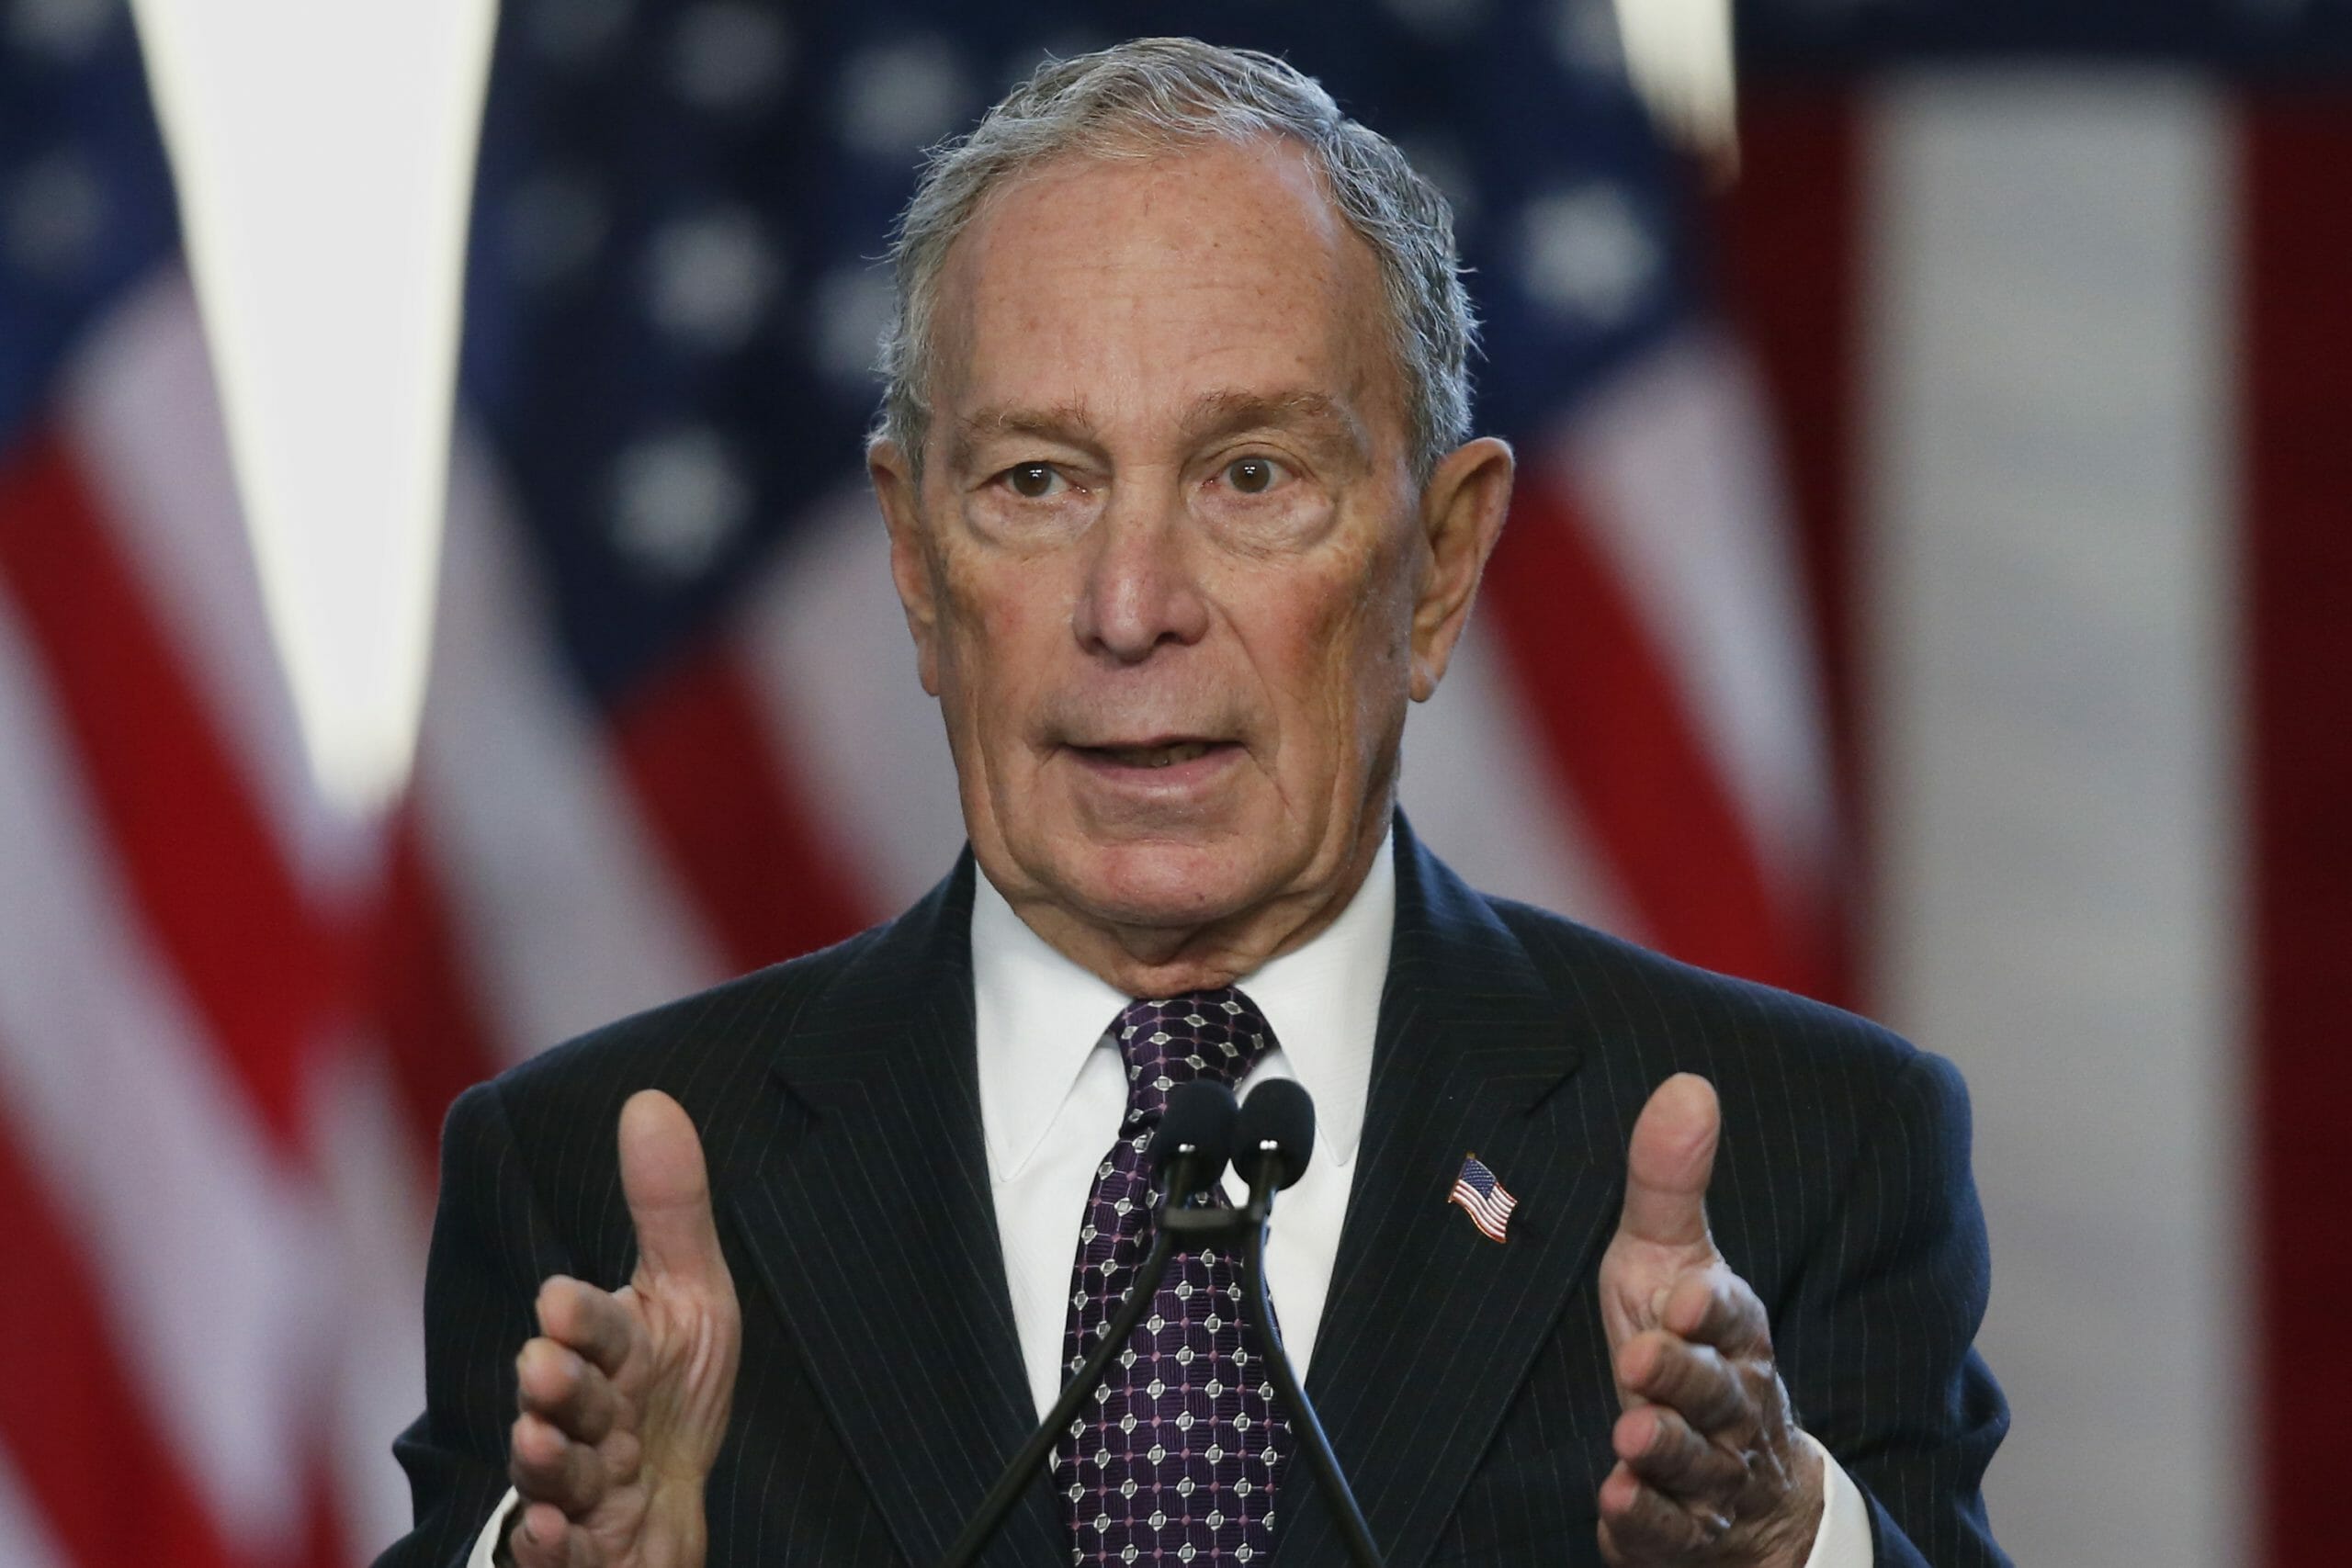 Democratic presidential candidate Michael Bloomberg